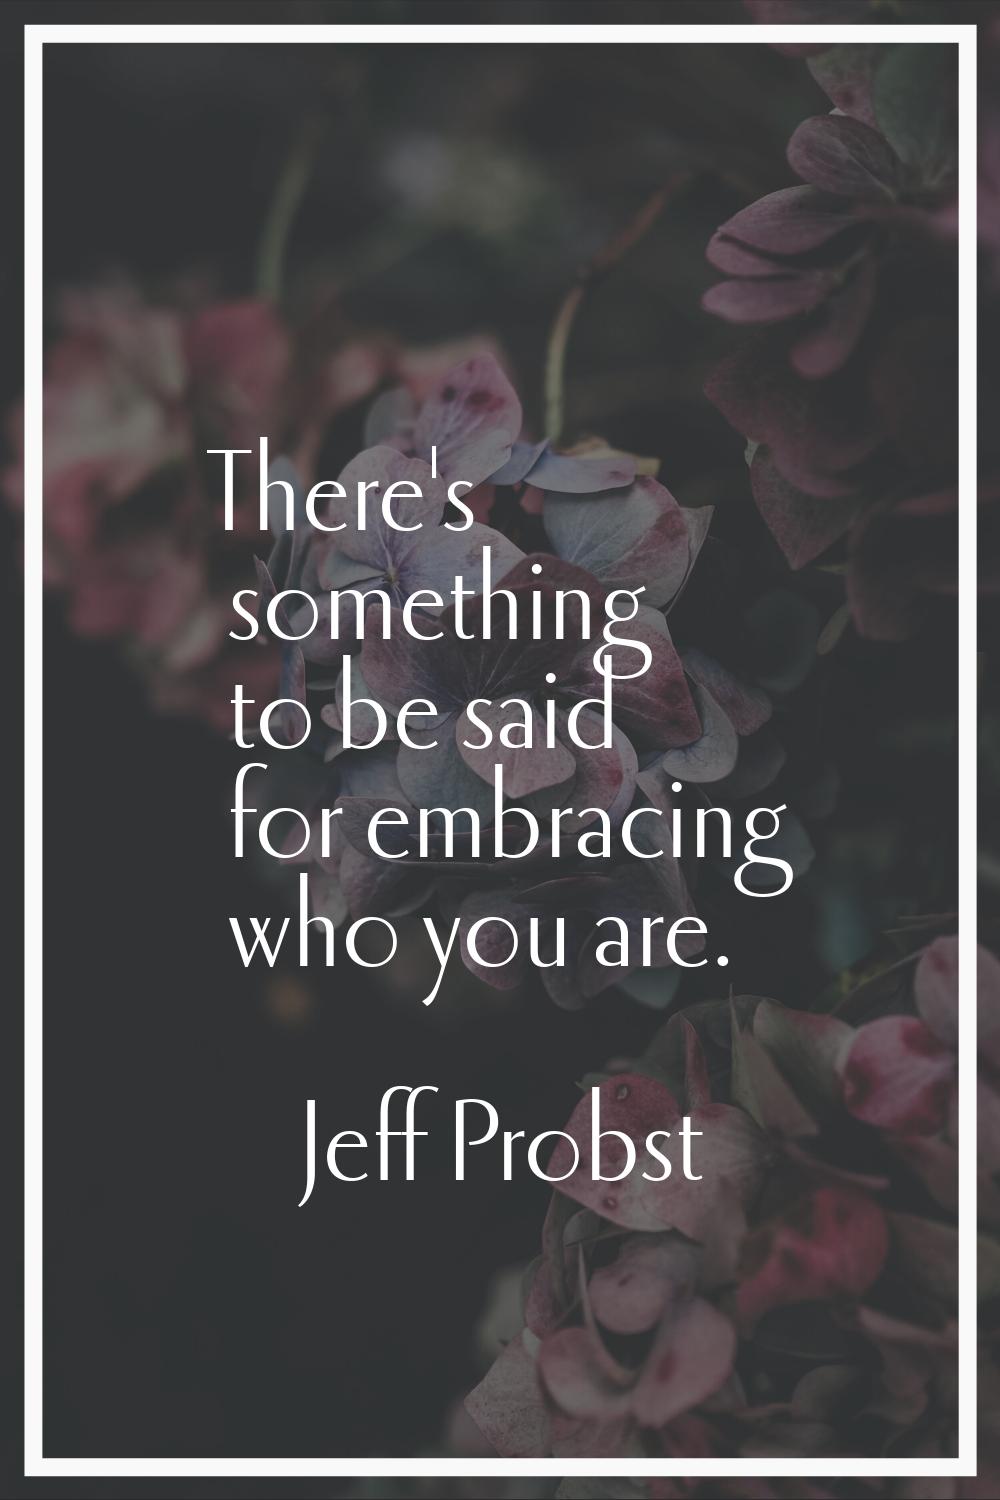 There's something to be said for embracing who you are.